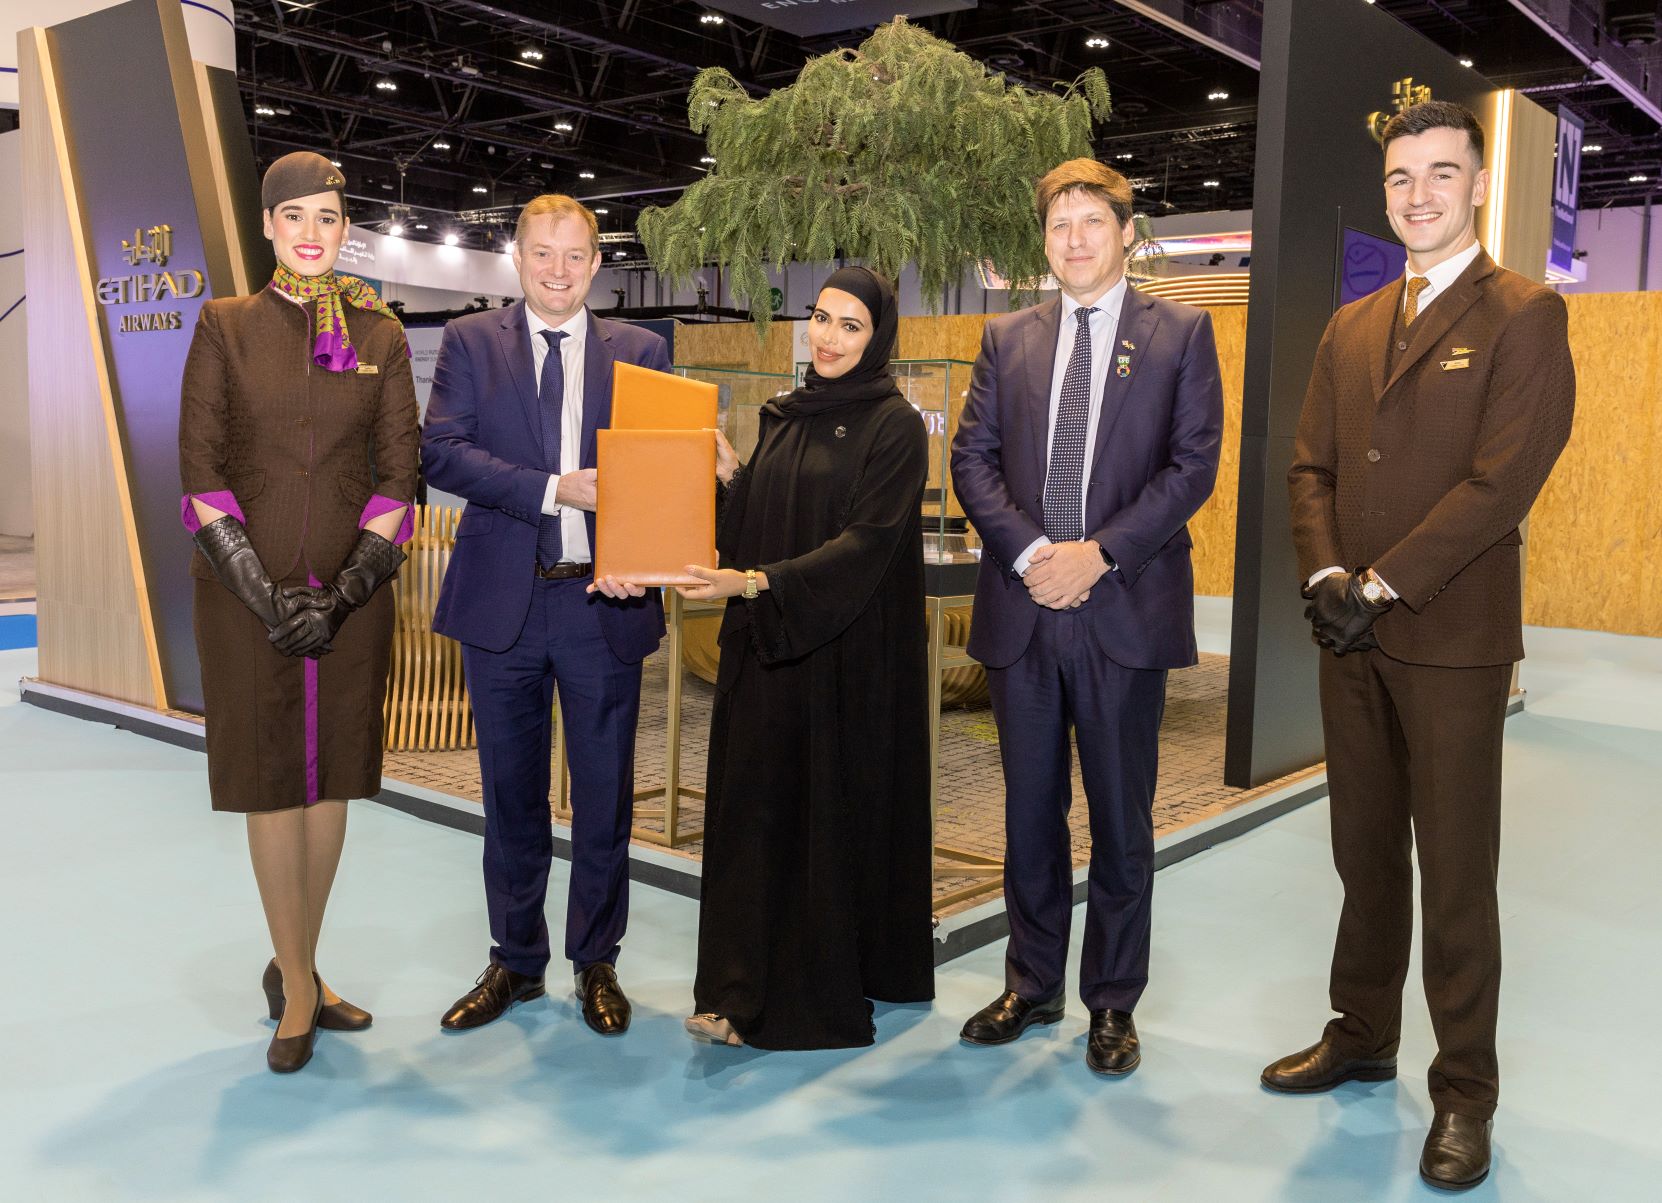 Etihad And Satavia Sign Multi-Year Commercial Agreement To Deliver Contrail Management And Future Carbon Credits Within Day-To-Day Operations